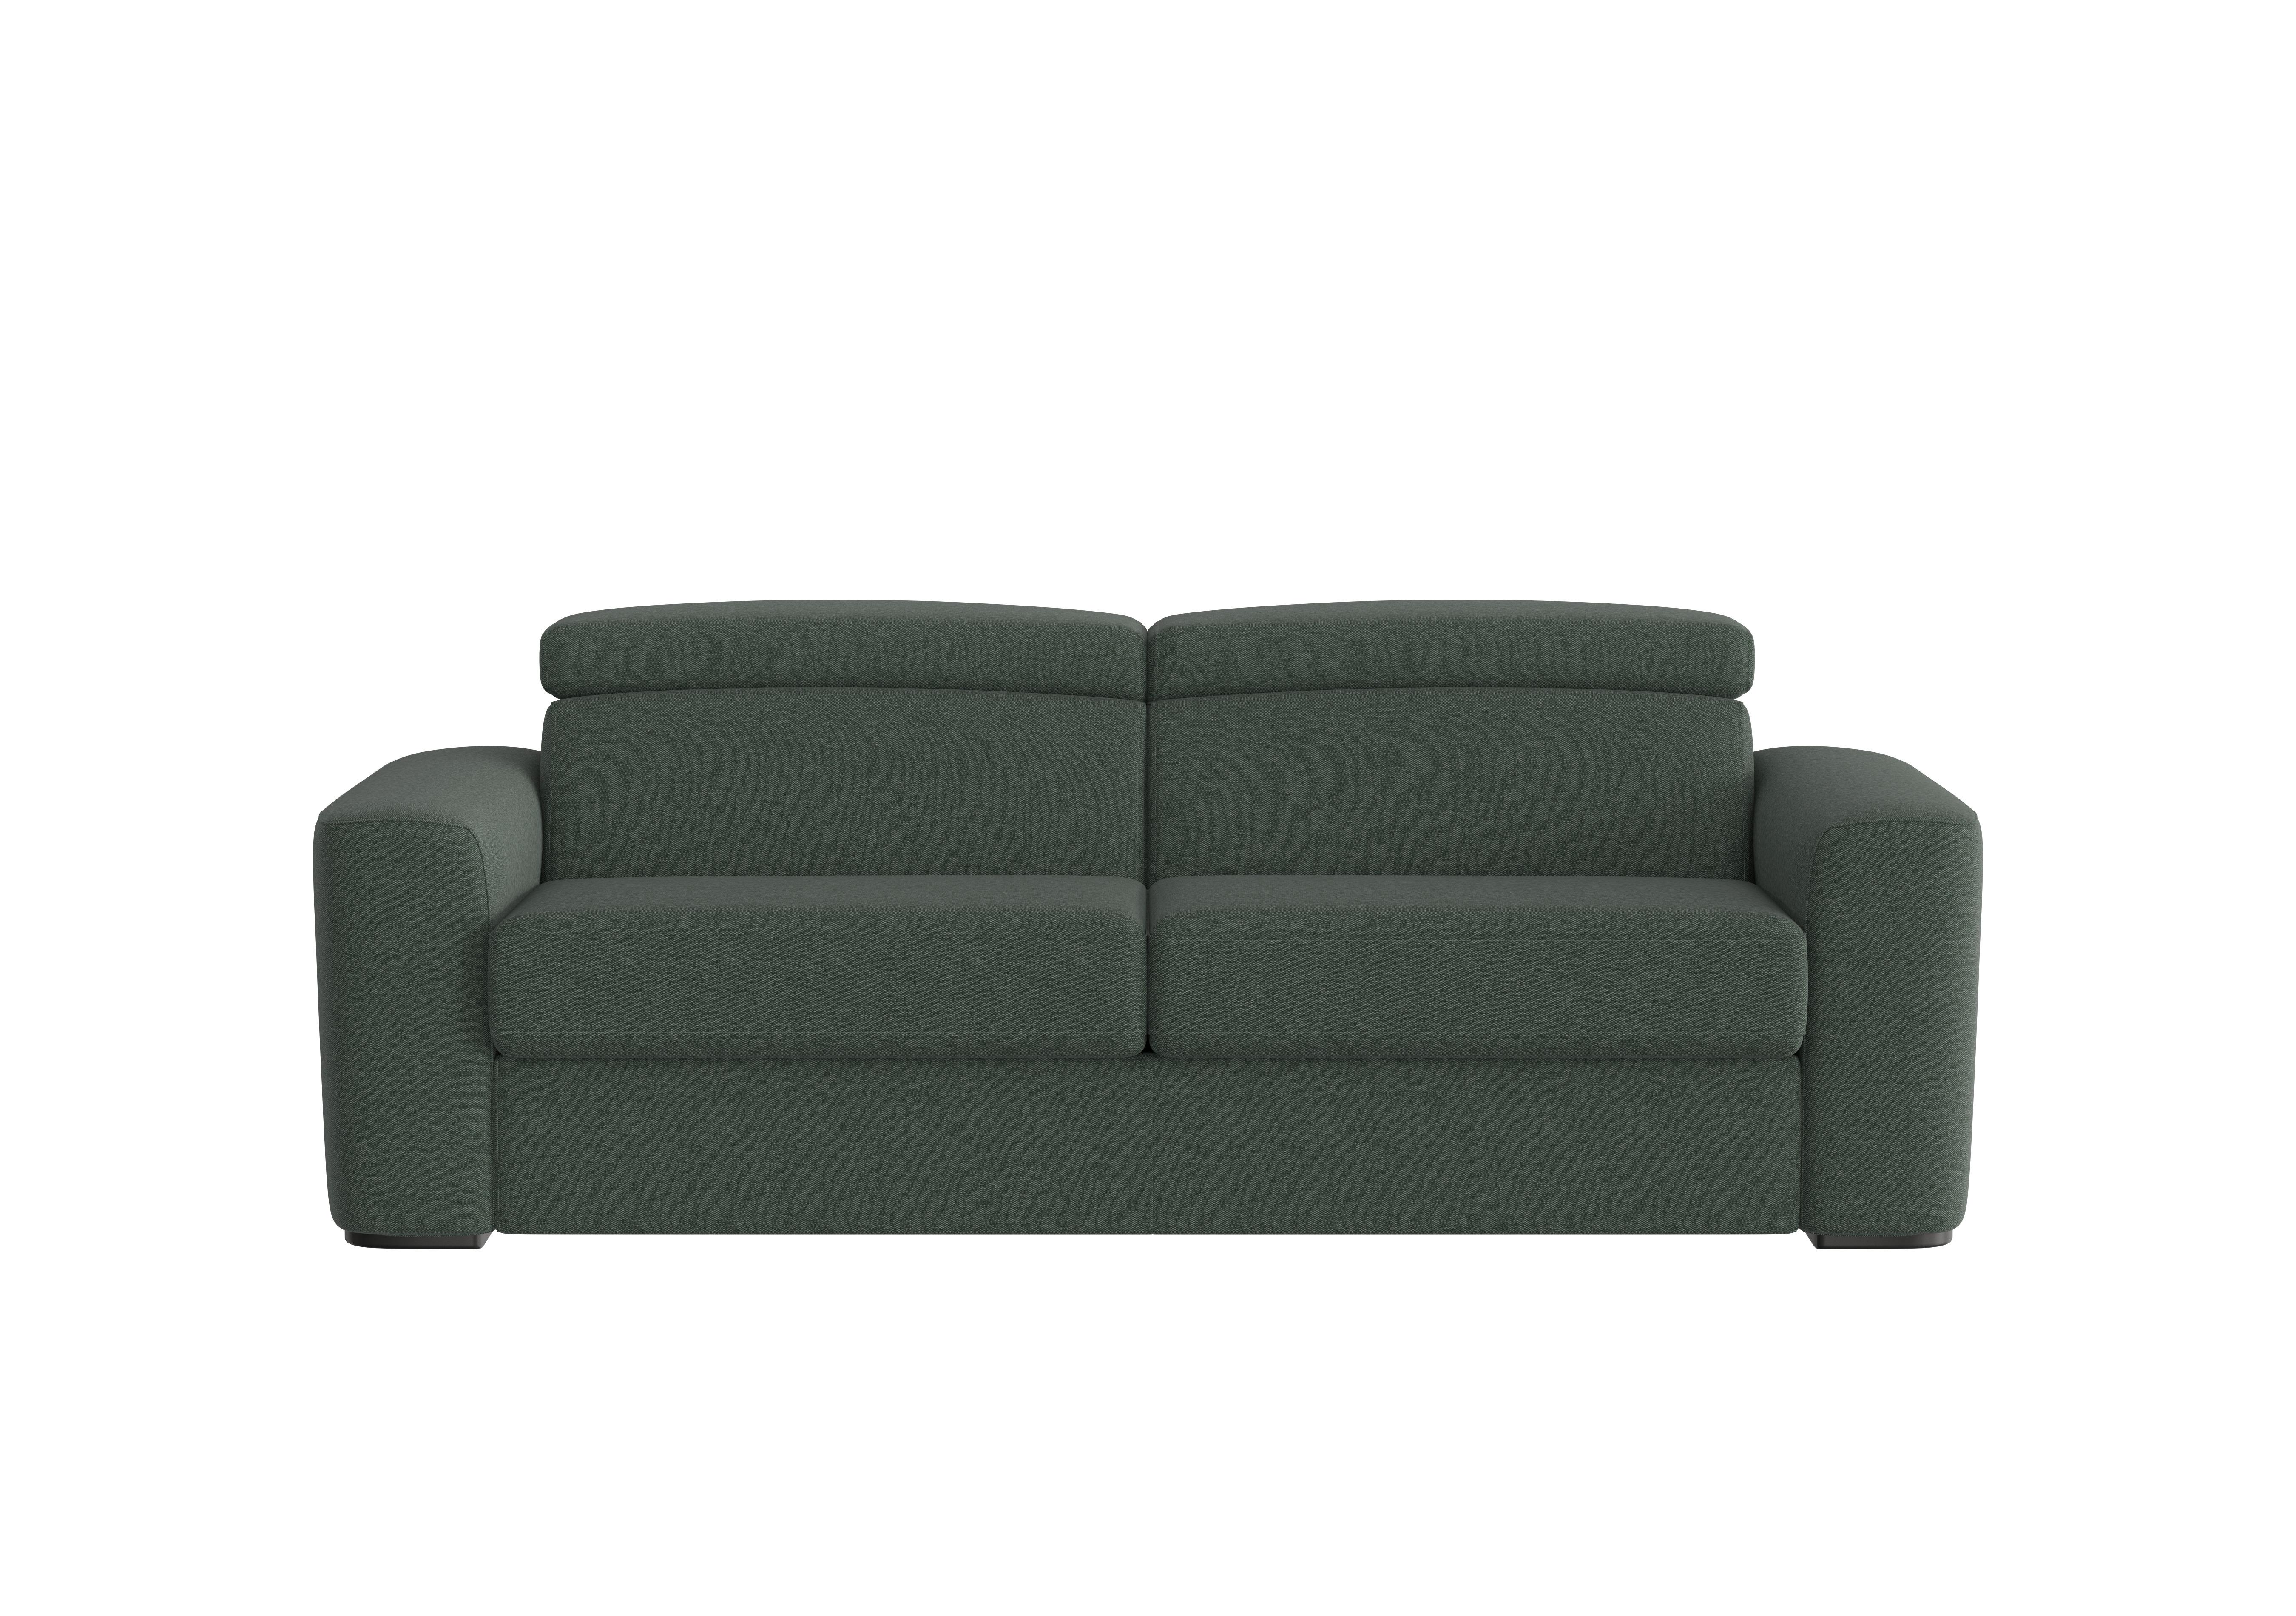 Infinity 3 Seater Fabric Sofa Bed in Fab-Ska-R48 Moss Green on Furniture Village